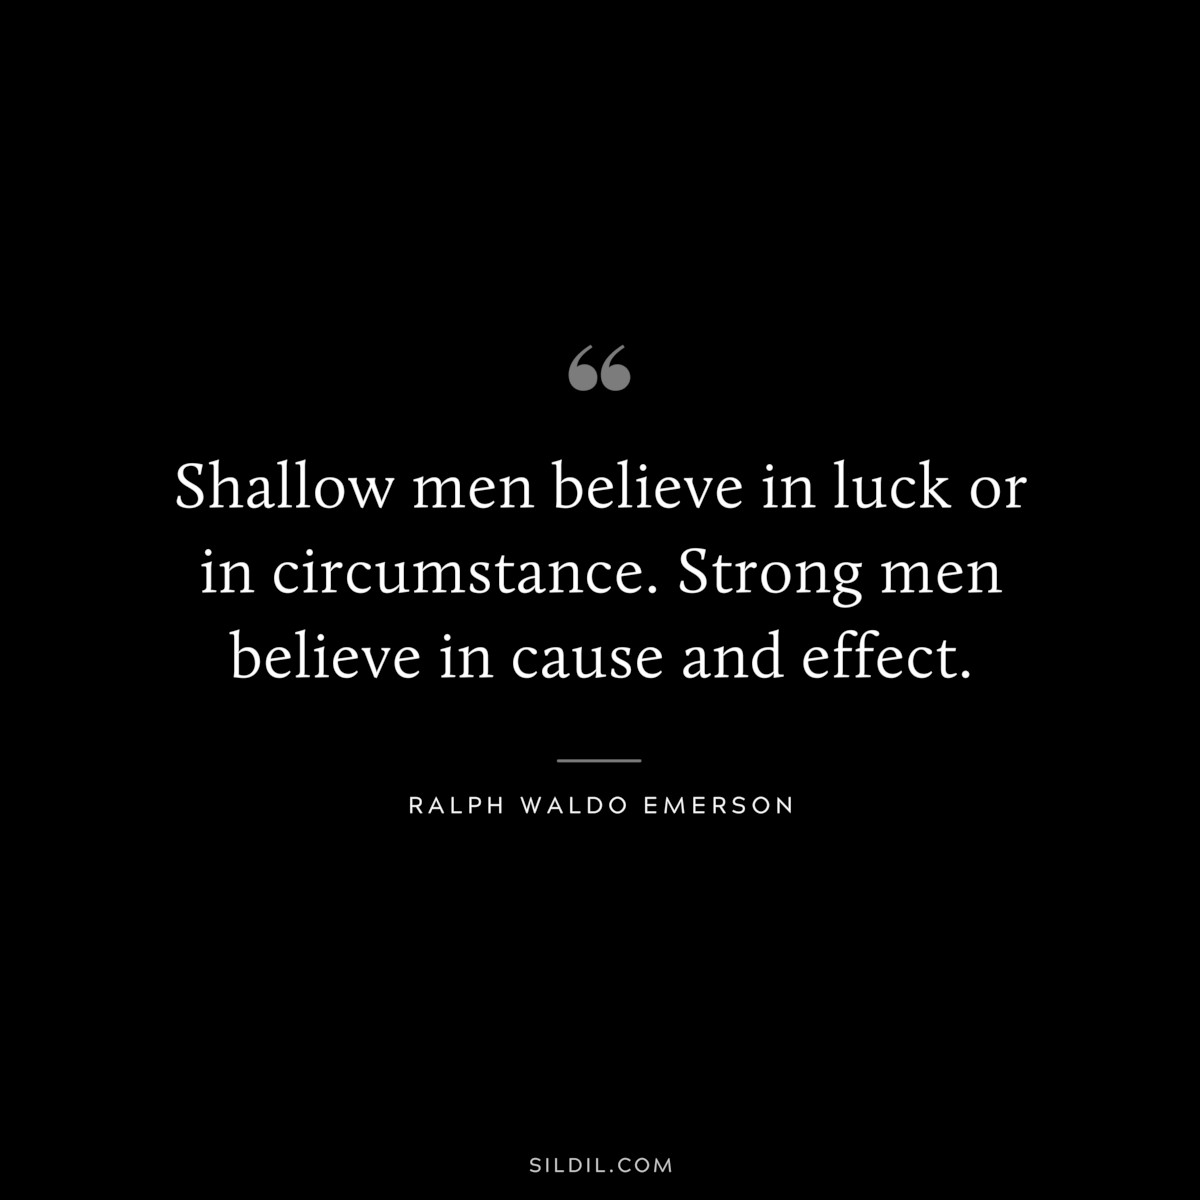 Shallow men believe in luck or in circumstance. Strong men believe in cause and effect. — Ralph Waldo Emerson